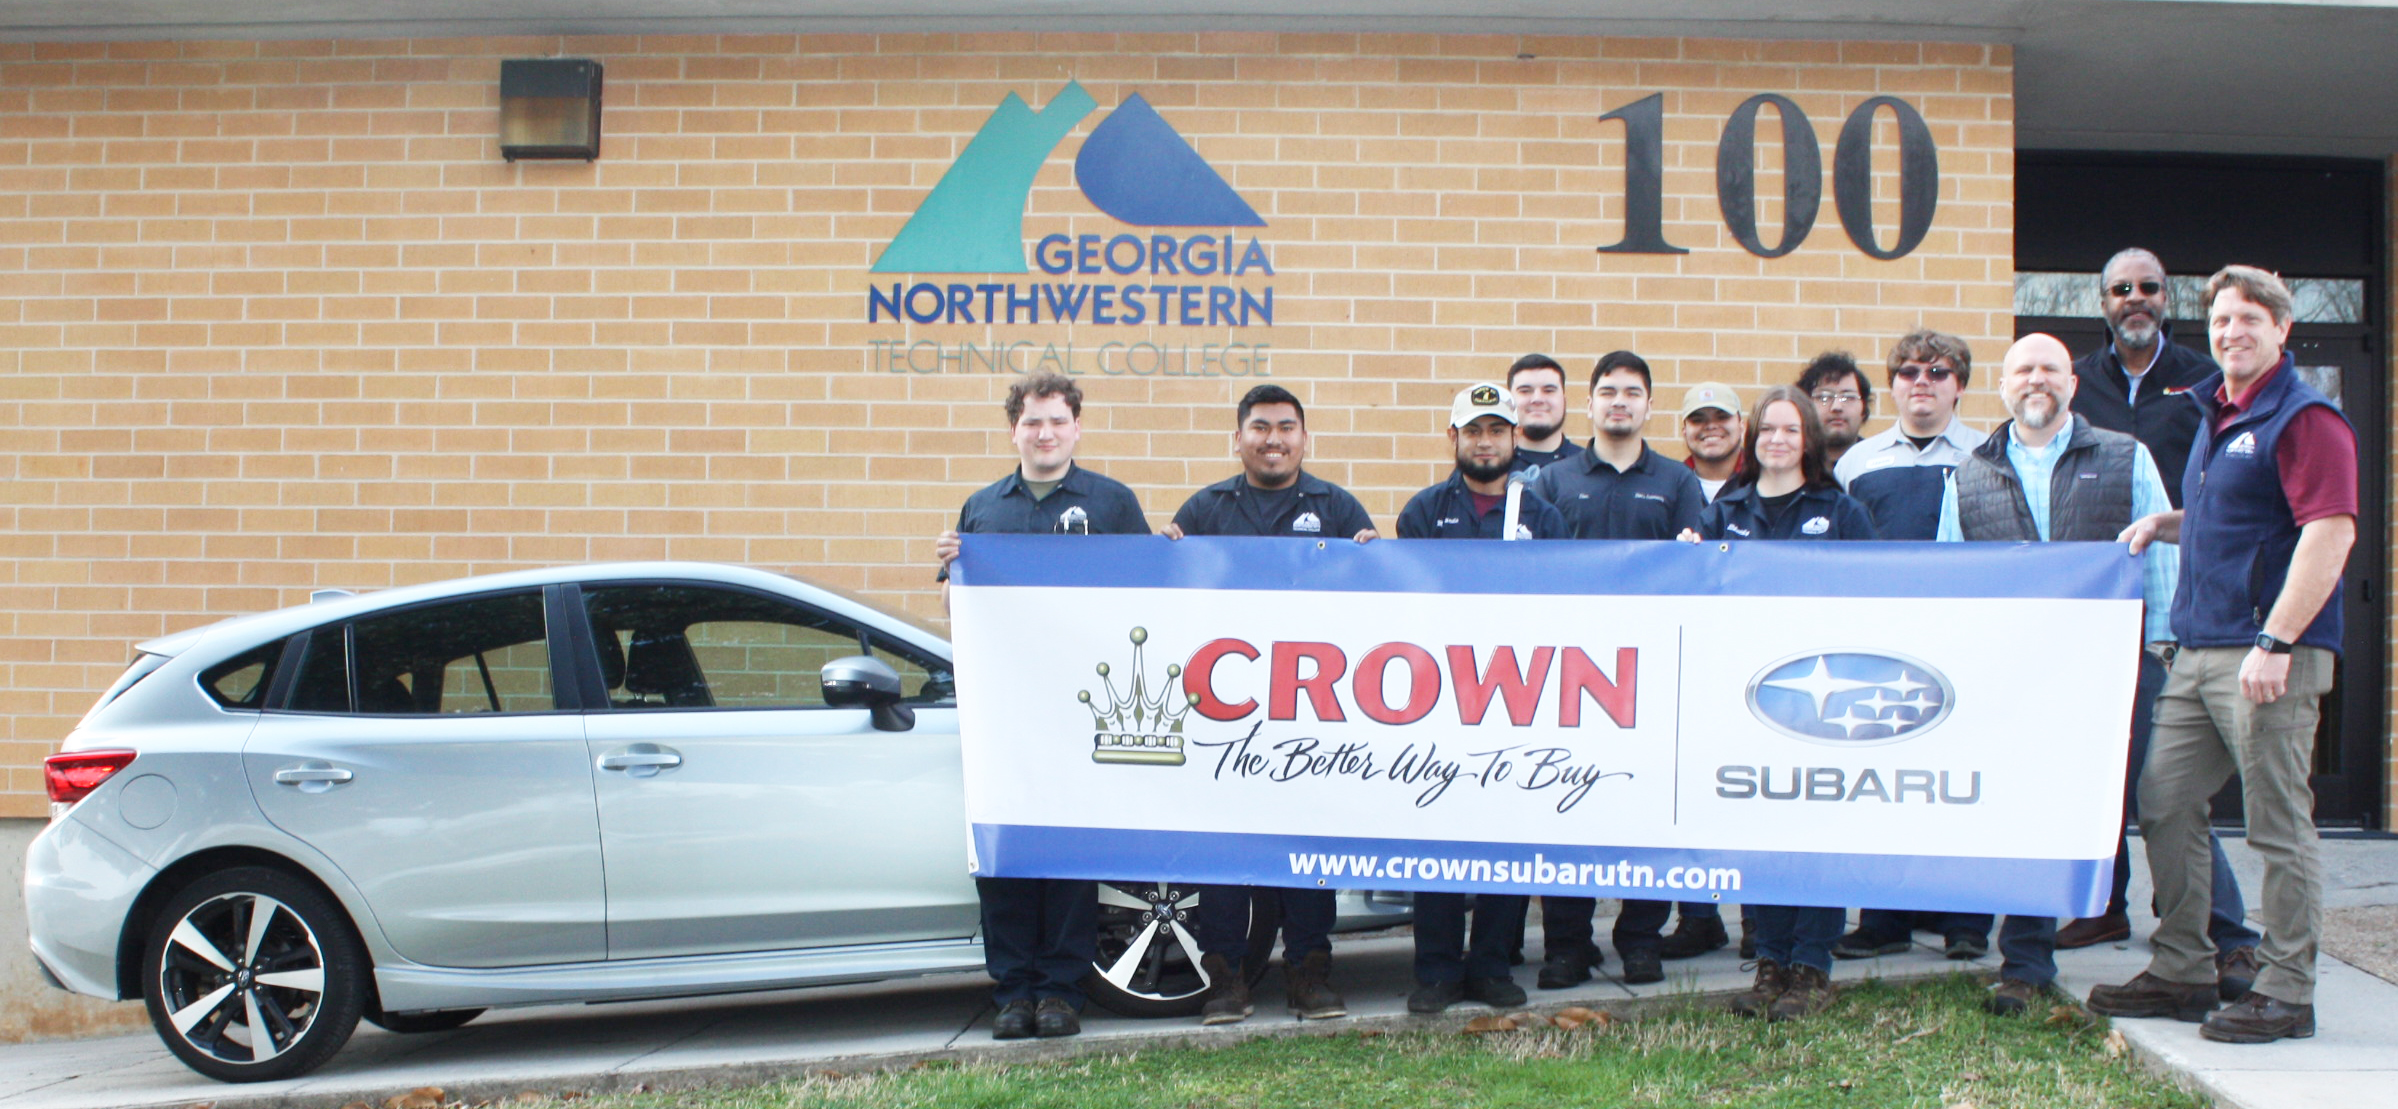 GNTC Automotive Technology instructor Troy Peco (far right) and his students on the Walker County Campus pose with a banner to thank Subaru representatives for the donation of a 2019 Subaru Impreza. From left are students Isaiah Lewis, Isidro Tapia, Miguel Pardo, Gavyn Peace, Eber Calzada, Alex Leon, Shelby Tapley, Luis Rodriguez and Jason Gonneville; Brent Roberts, district parts/service manager for Subaru of America Inc., and Desmond Hagan, fixed operations director for Crown Subaru in Chattanooga.